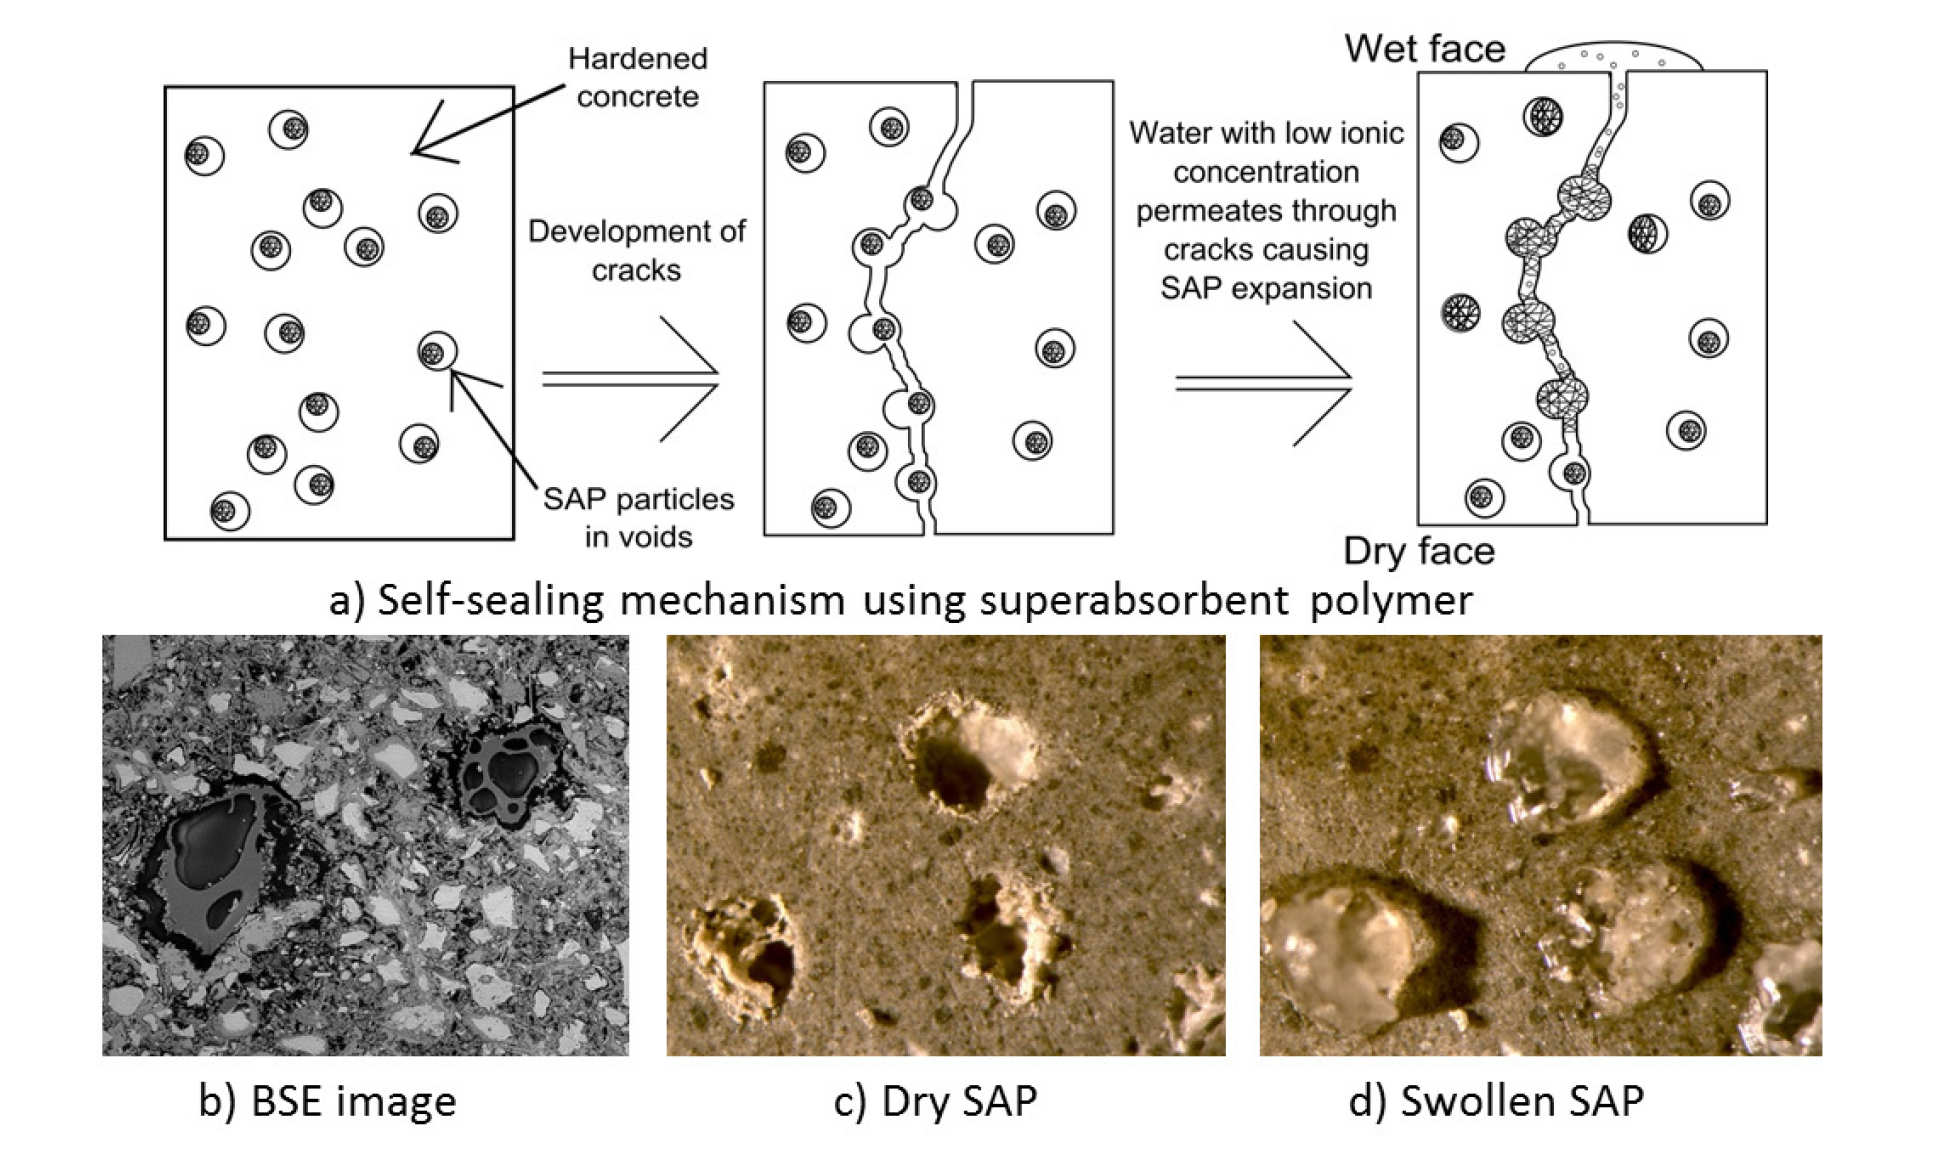 Self-sealing of cracks in cement-based materials using superabsorbent